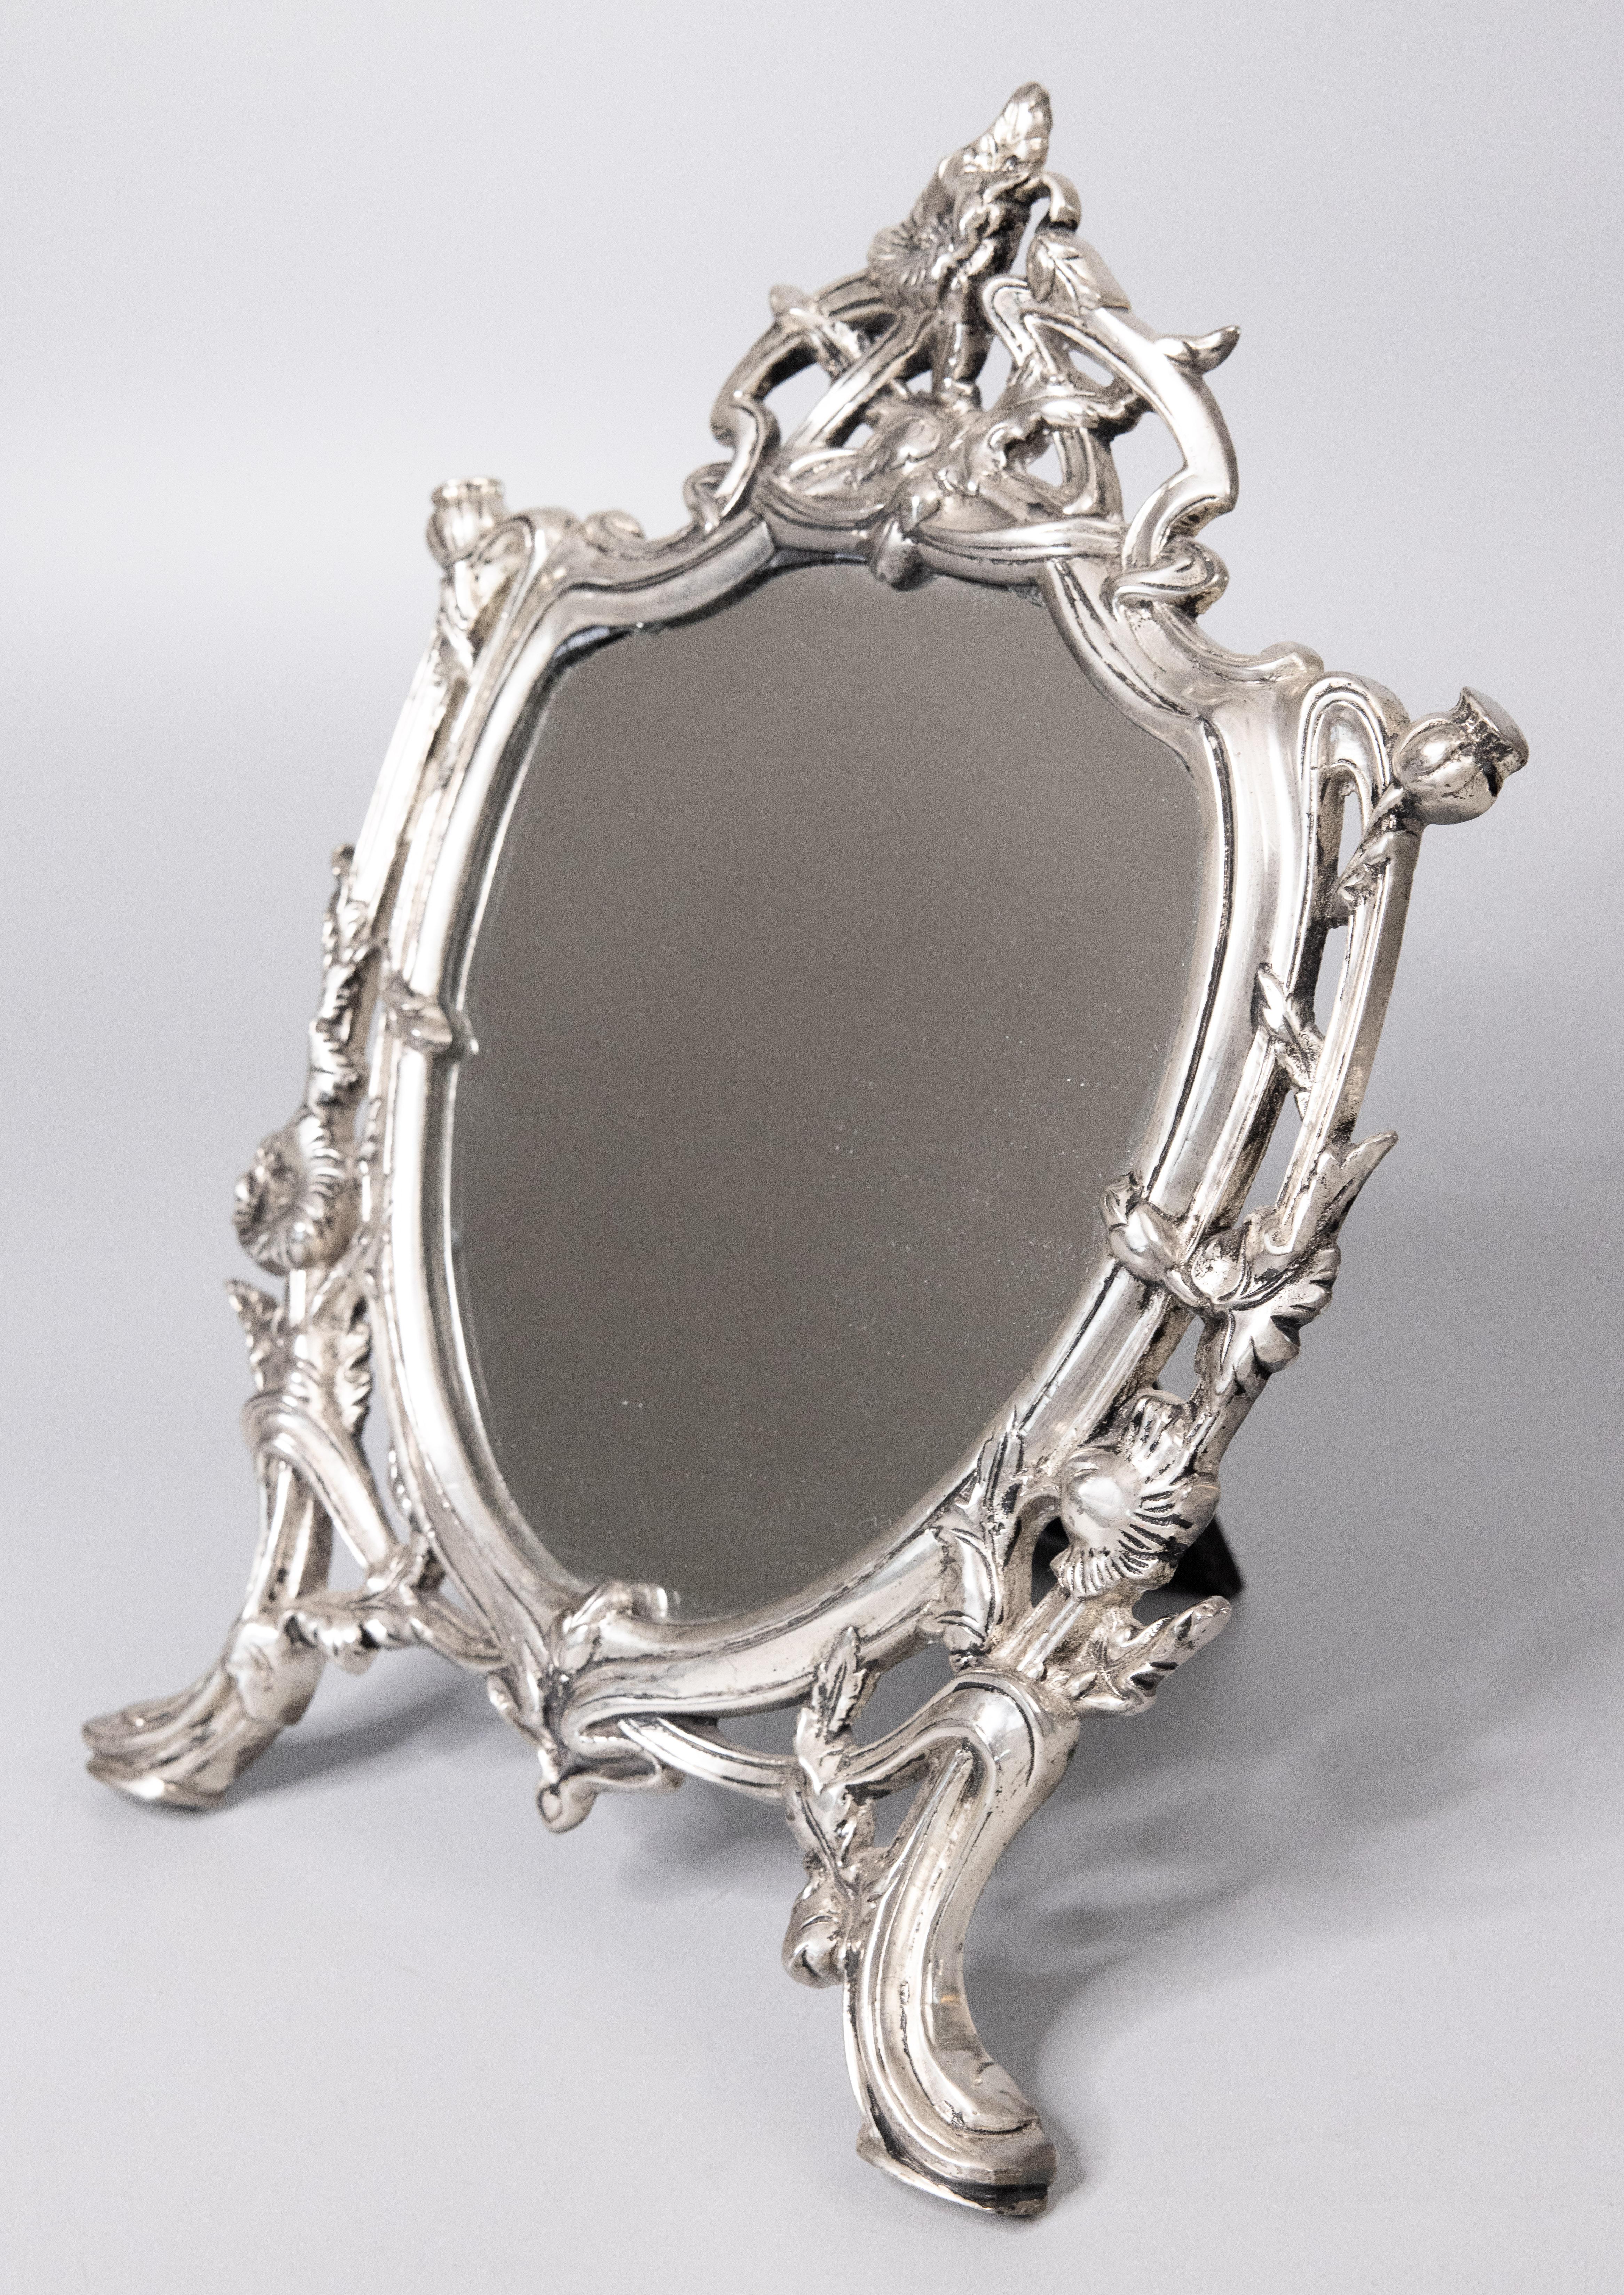 An antique French silverplated dresser tabletop vanity easel back mirror with a lovely Art Nouveau floral design, circa 1900. It would be beautiful displayed on a dresser or vanity.

DIMENSIONS
9.5ʺW × 1.25ʺD × 14ʺH